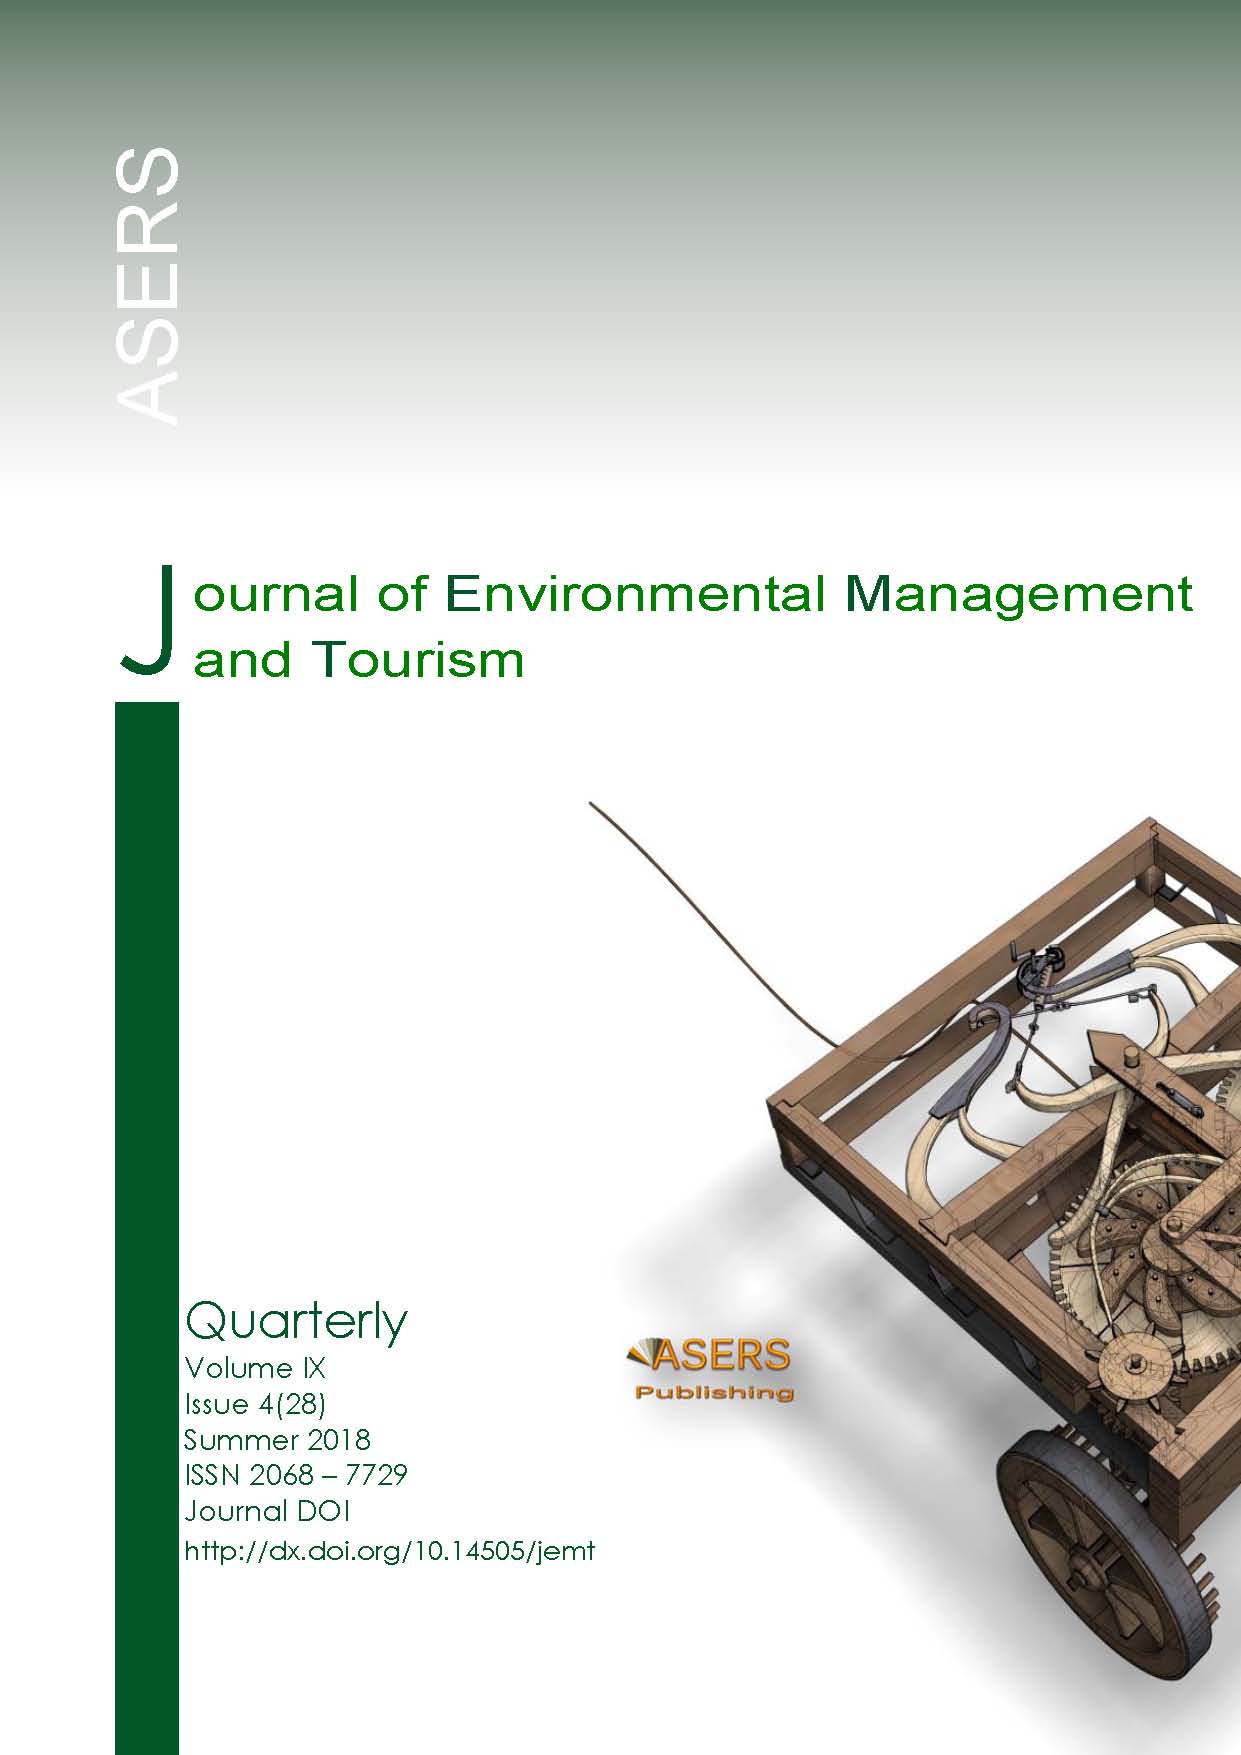 Innovation Strategy the Development of Competitiveness of Eco-Based Coastal Tourism Destination, Management Organization and Quality of Services Cover Image